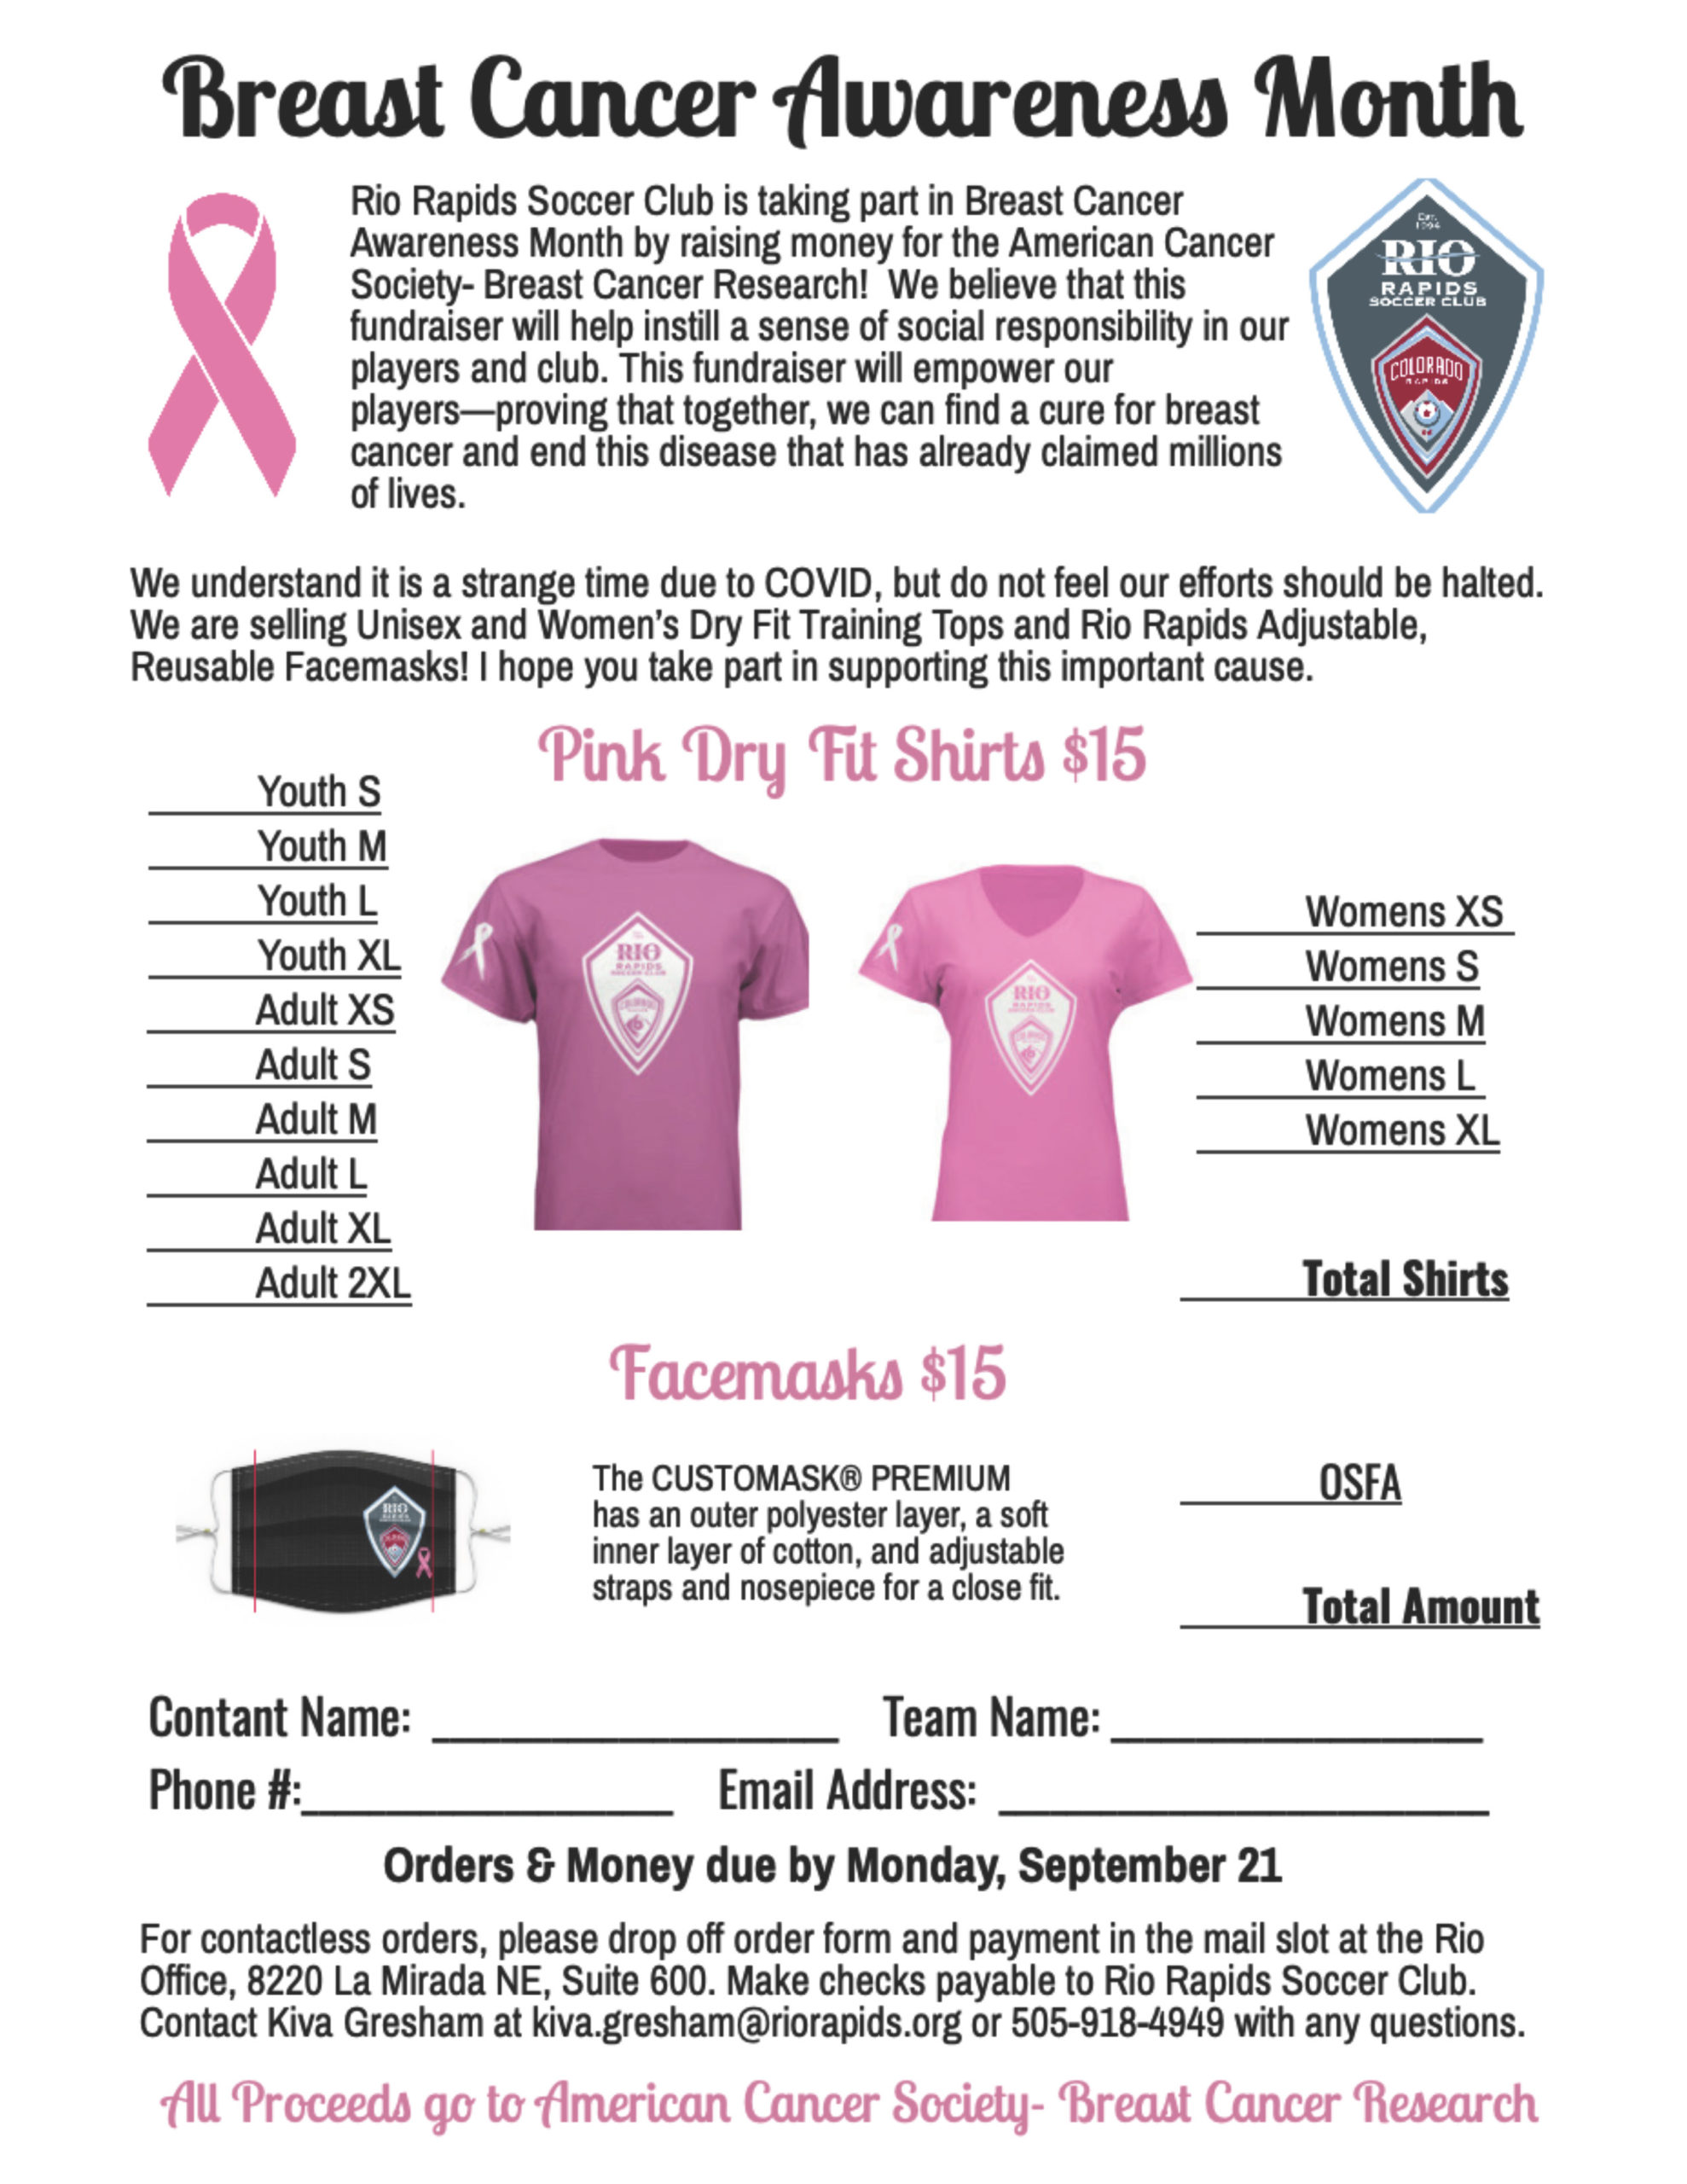 2020 Breast Cancer Order Form scaled